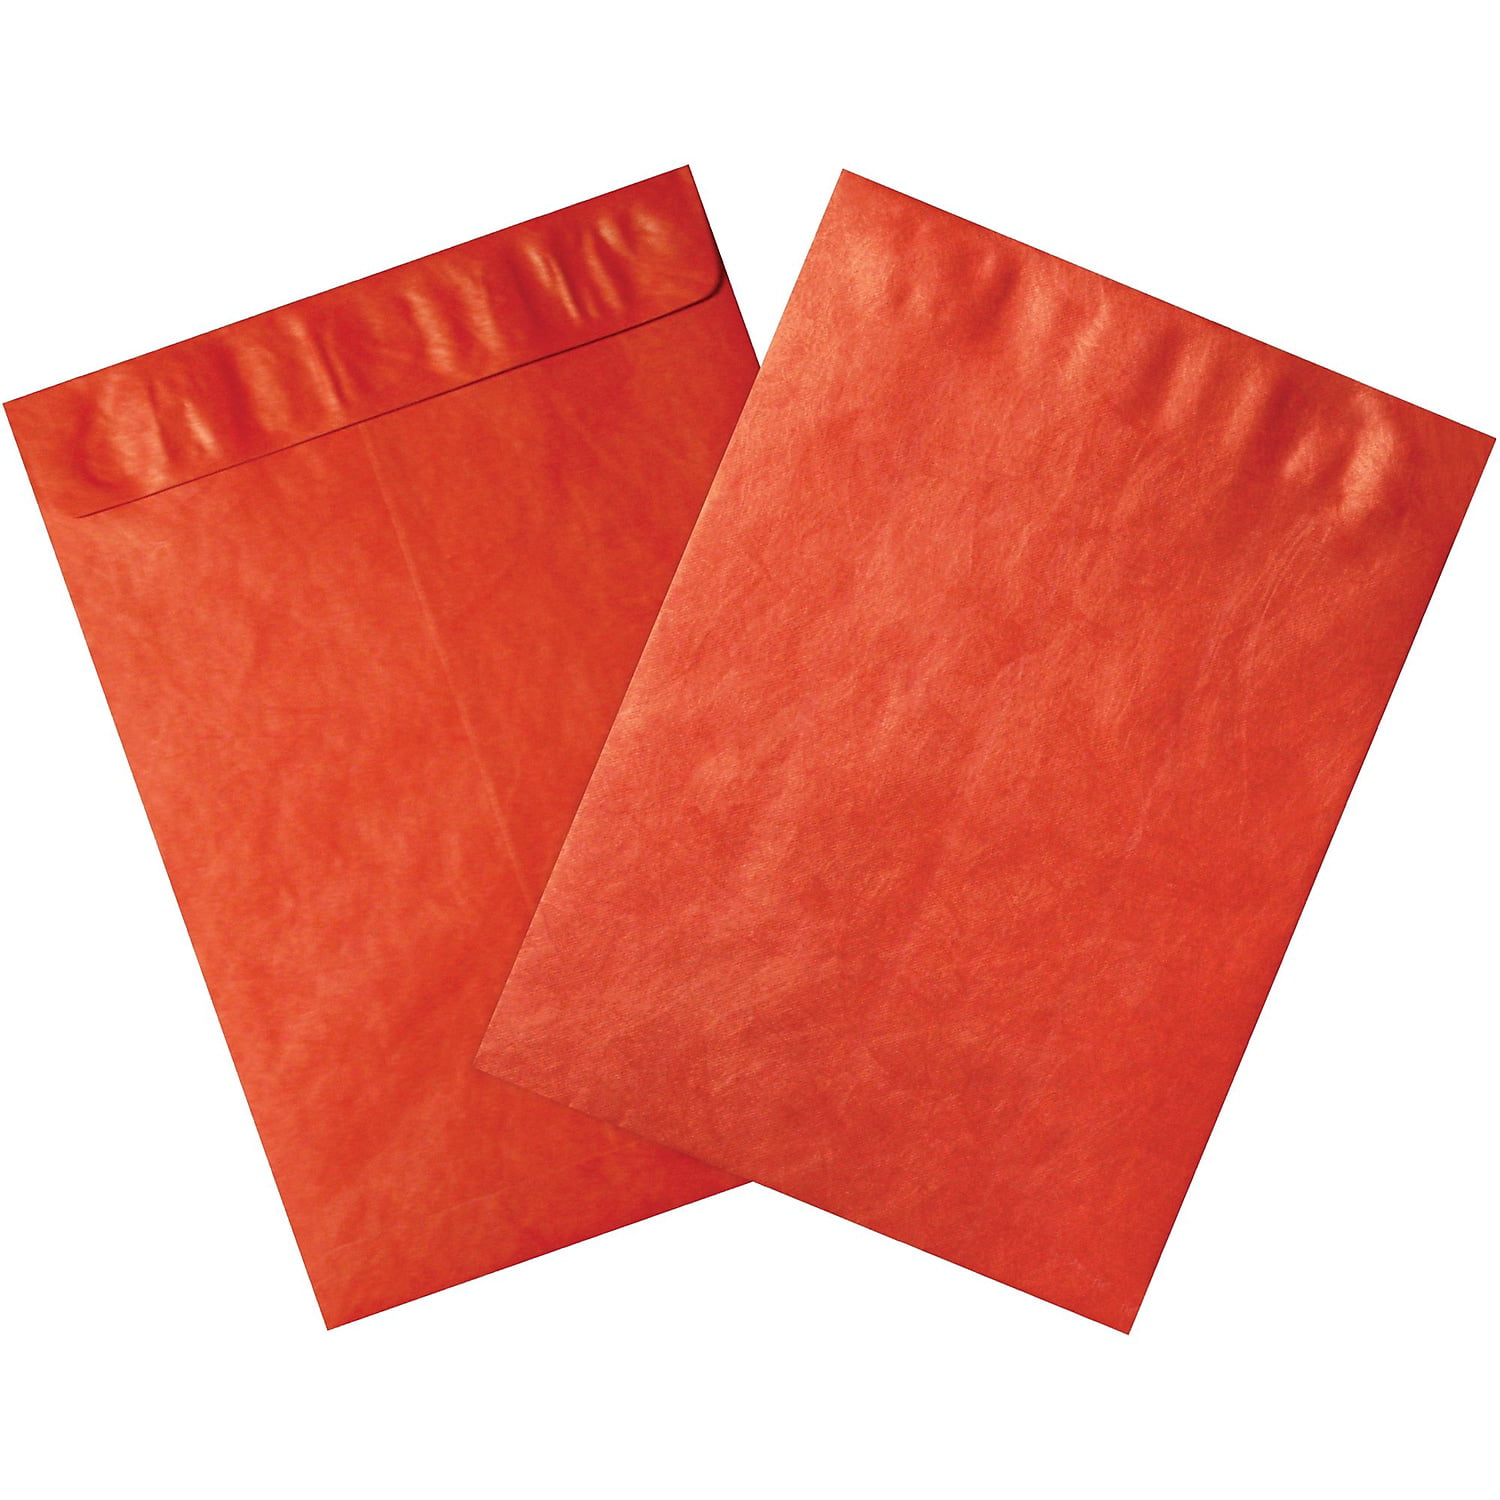 Picture of Tyvek TYC1215R 12 x 15.5 in. Red Envelopes - Case of 100